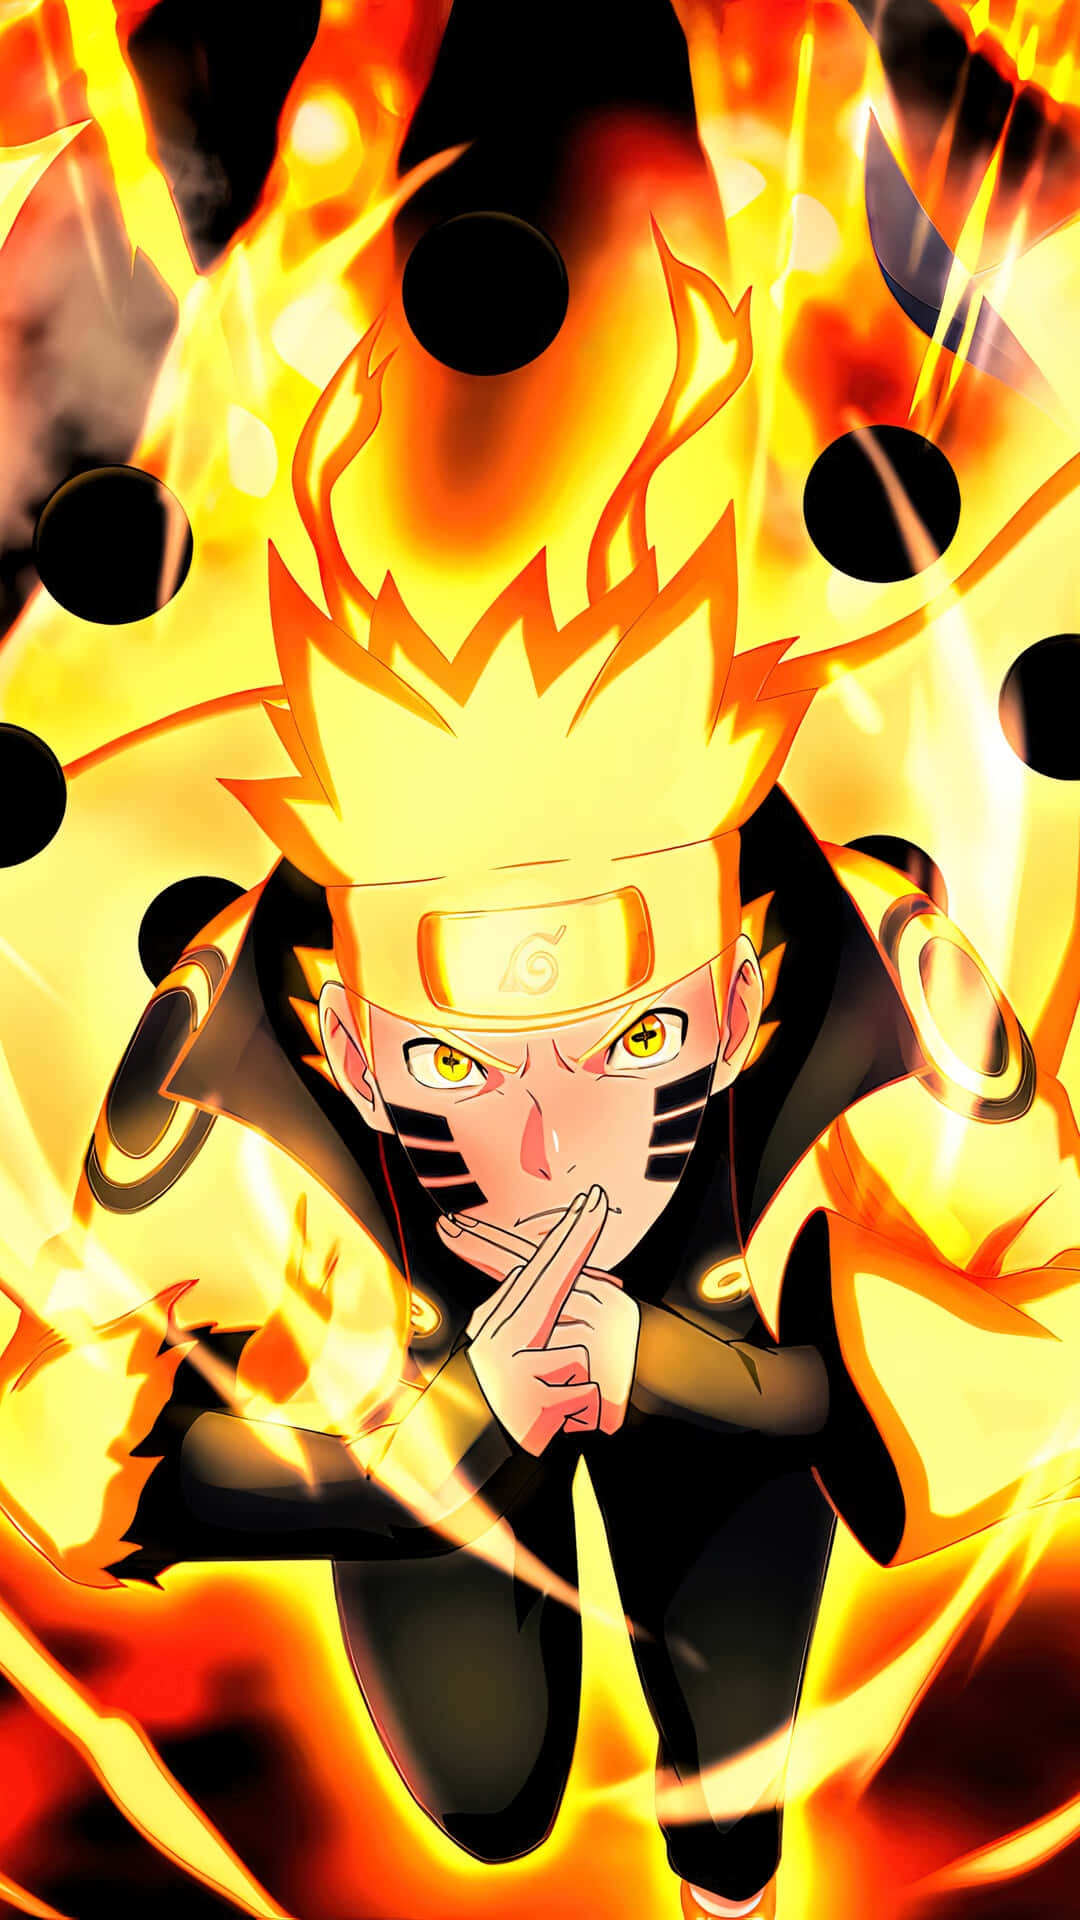 Sage Of The Six Paths - The Divine Figure In Naruto Shippuden. Wallpaper